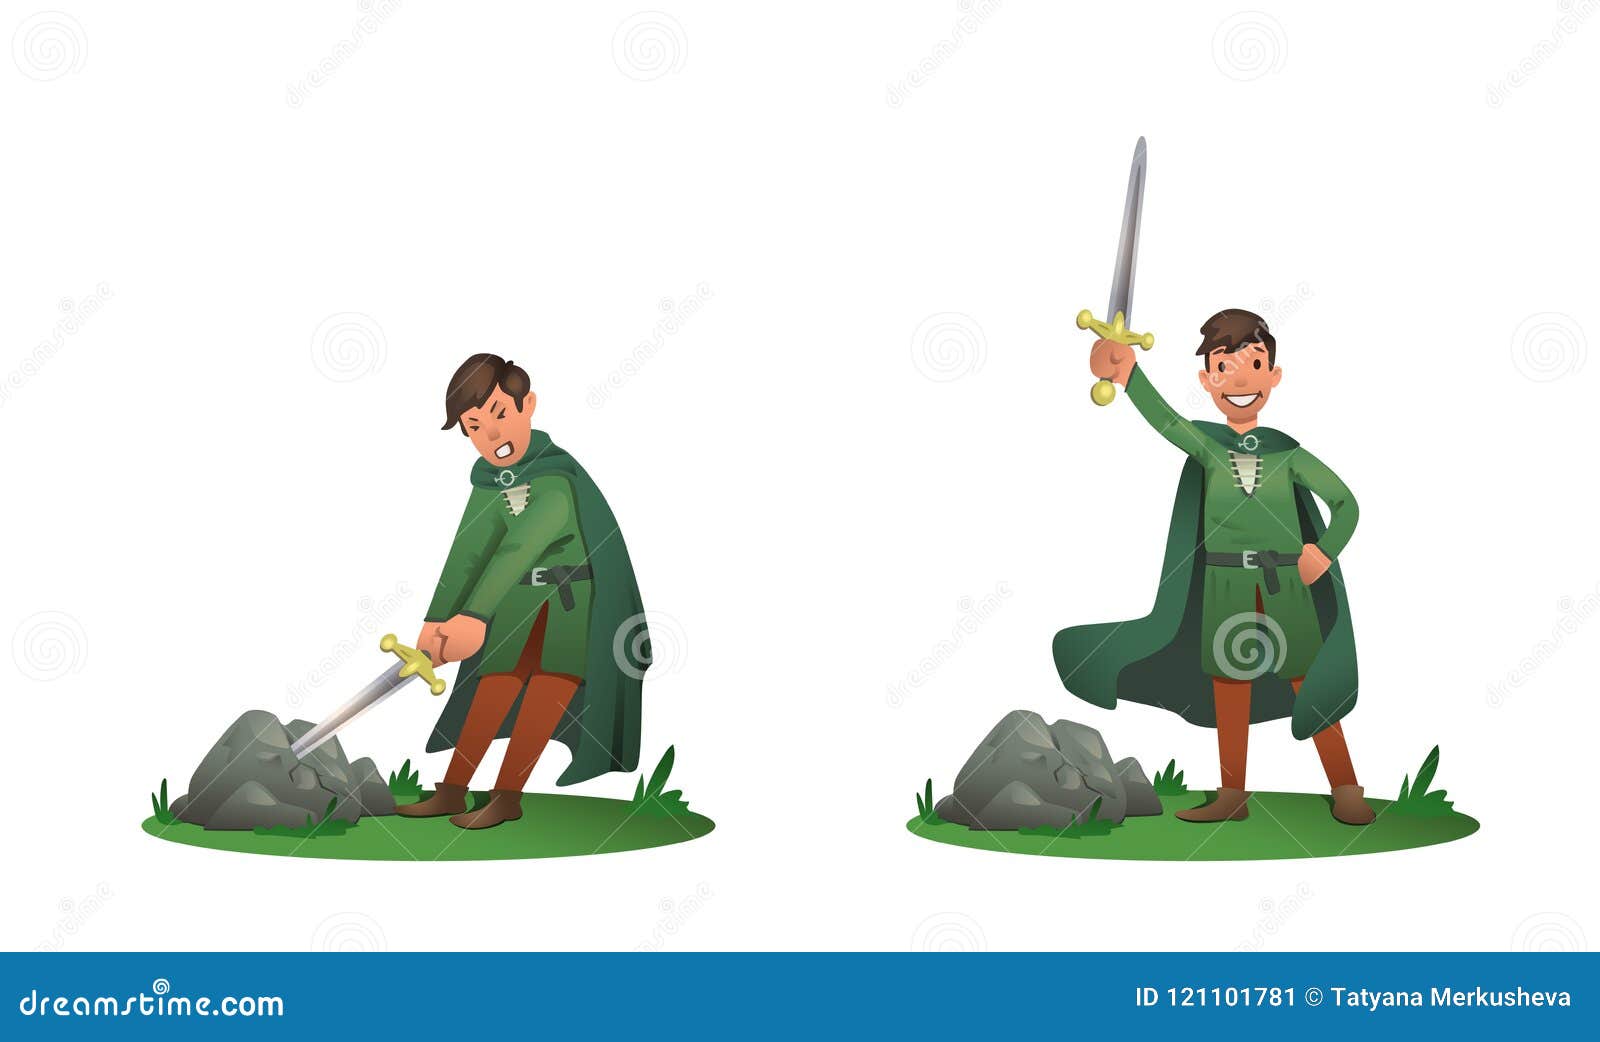 Young King Arthur Withdrawing Excalibur of the Stone and Holding it Above  the Head. Set of Two Postures, Cartoon Stock Vector - Illustration of arthur,  character: 121101781